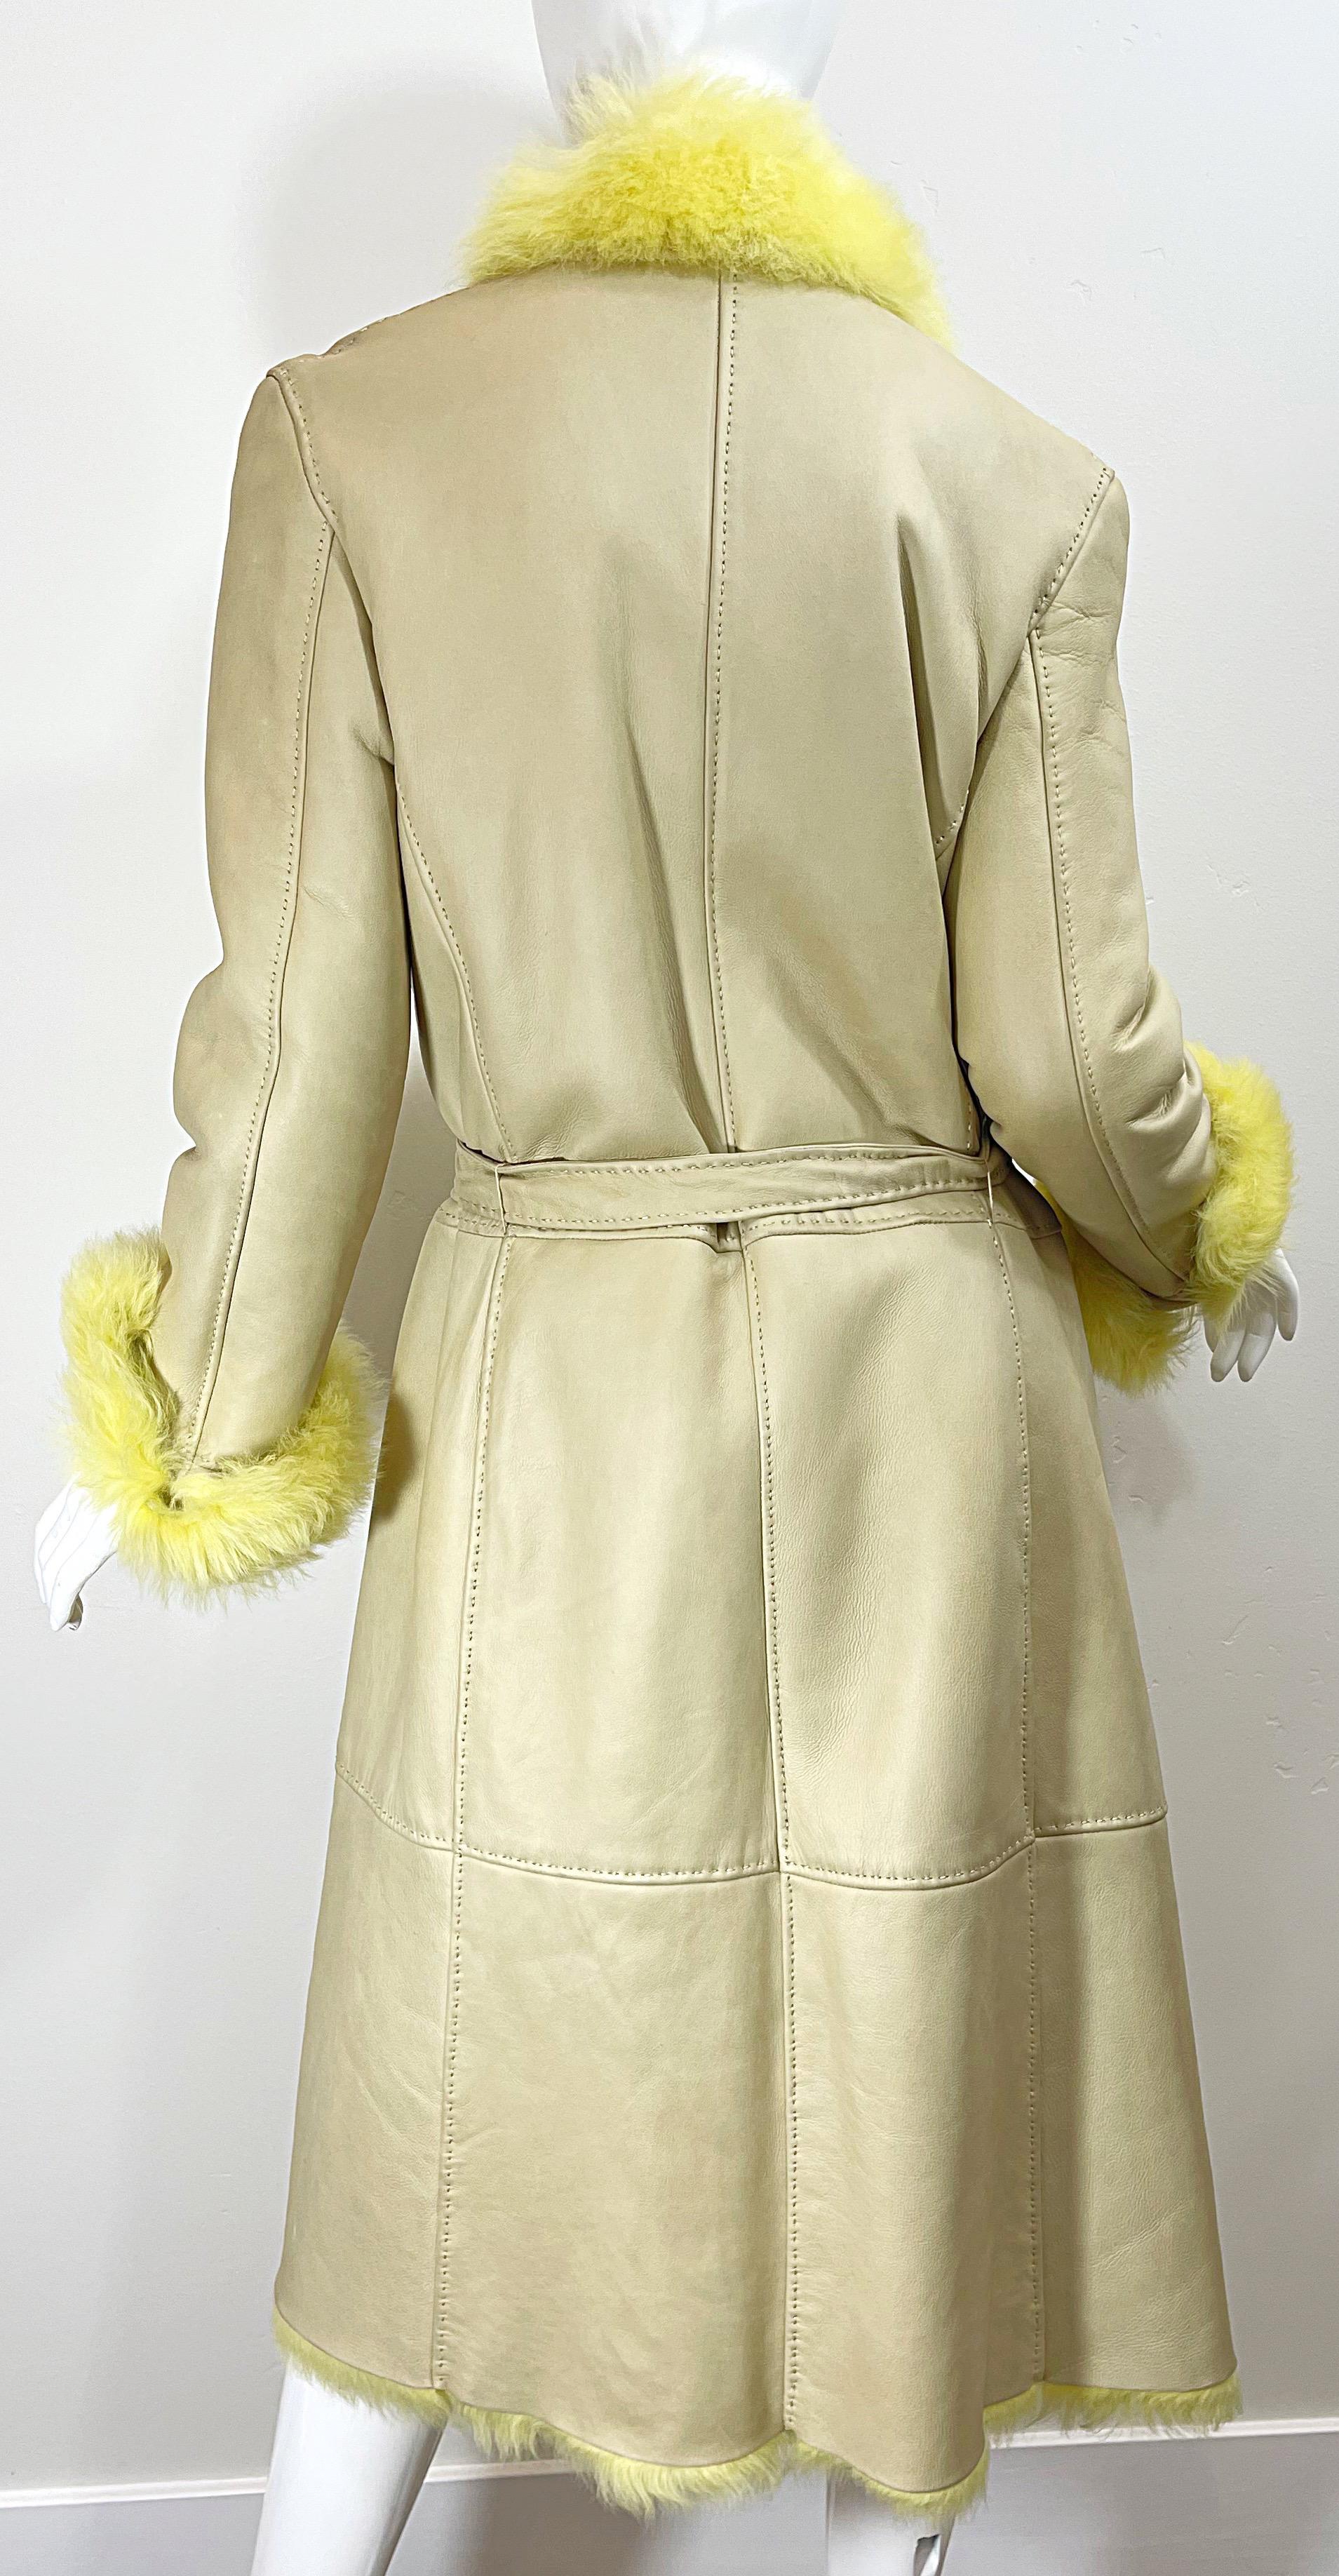 1990s Gianni Versace Tan Leather Yellow Shearling Fur Vintage Trench Coat Jacket For Sale 4